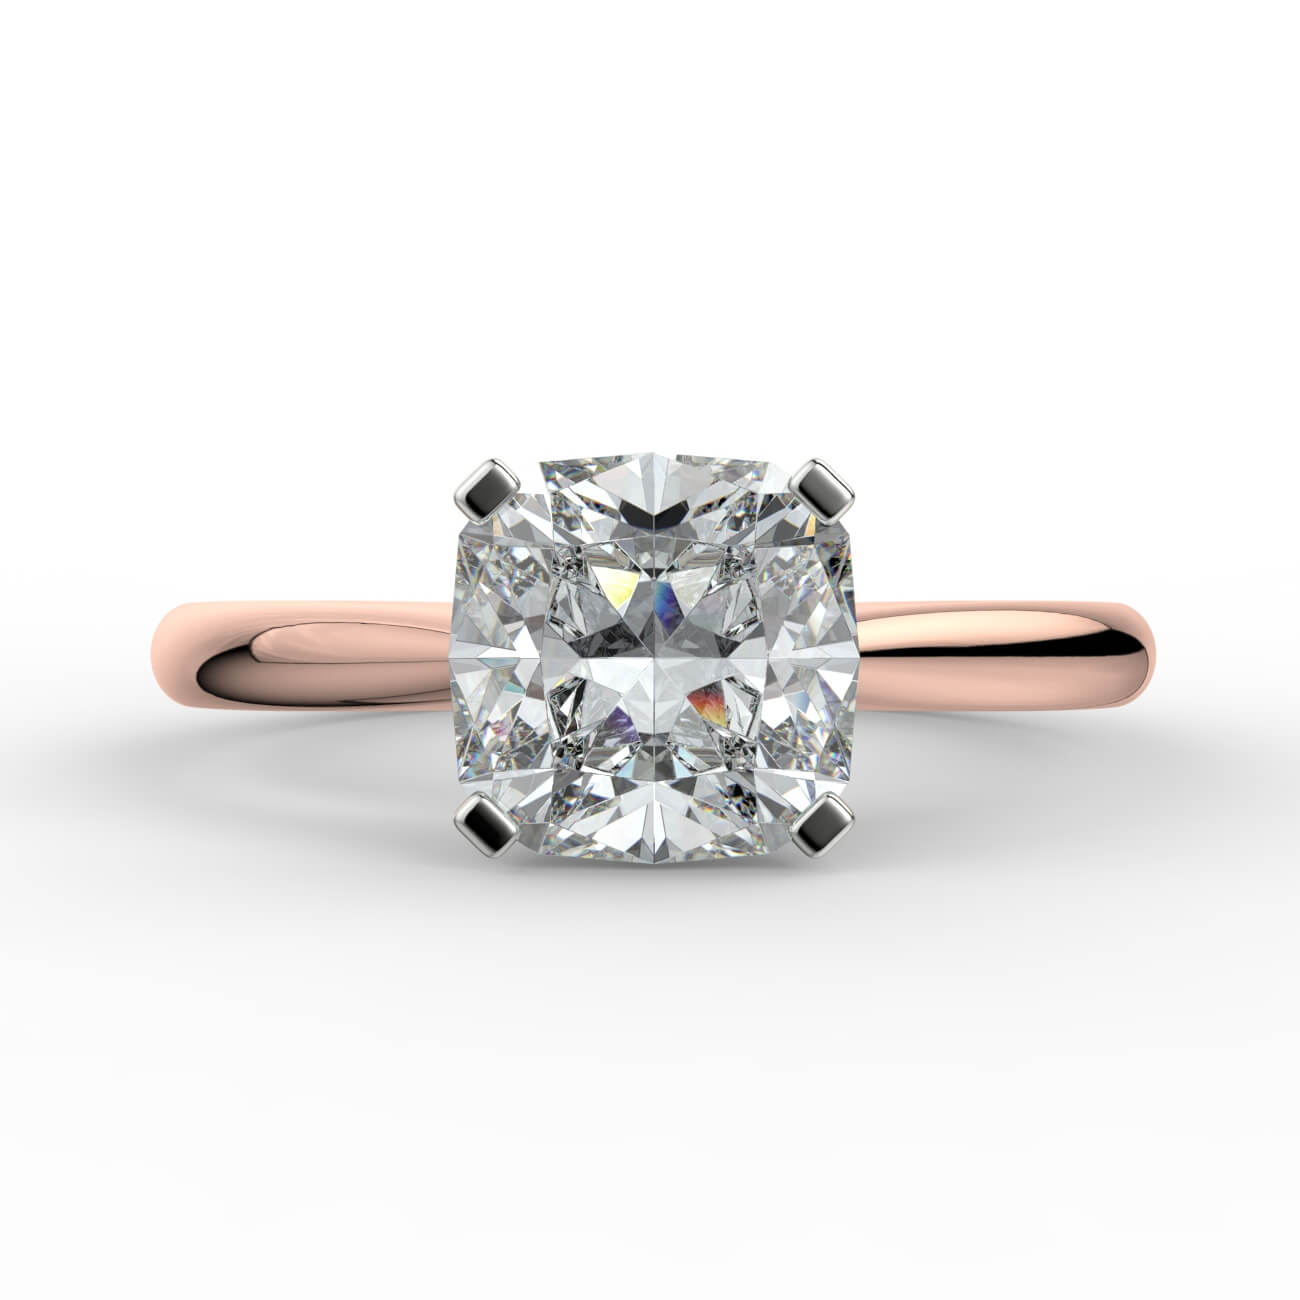 Cushion cut diamond cathedral engagement ring in white and rose gold – Australian Diamond Network